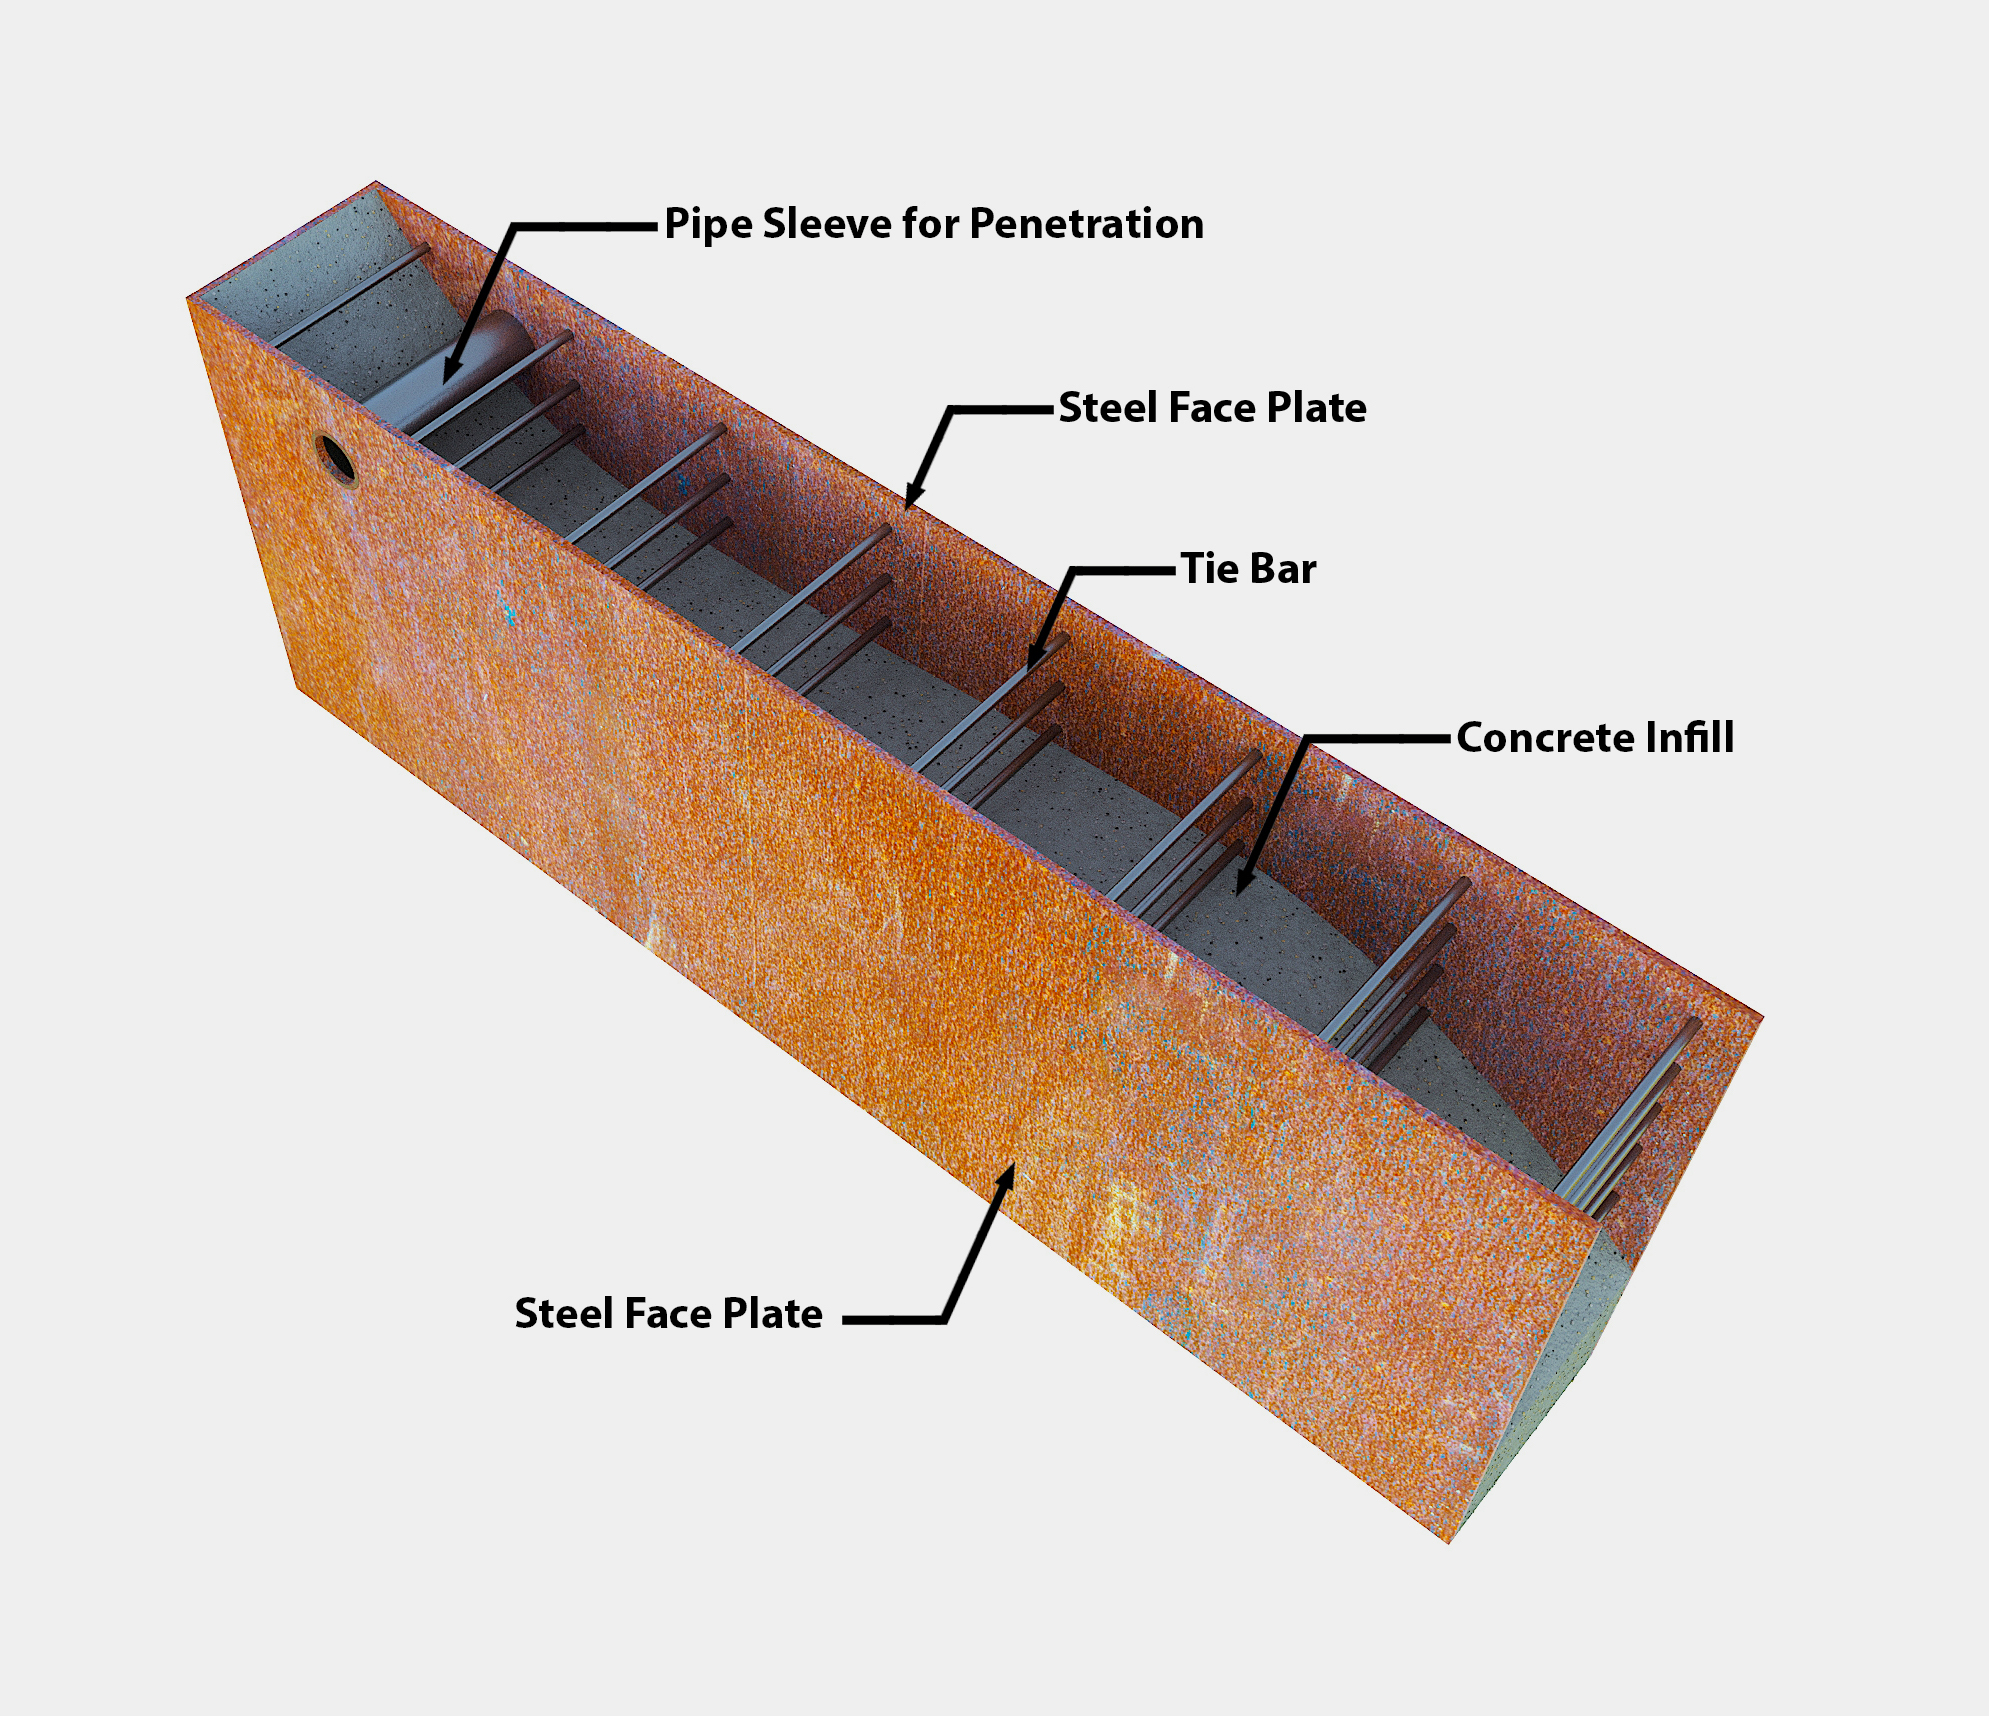 AISC releases SpeedCore design guide for building concrete-filled composite steel plate shear wall core systems